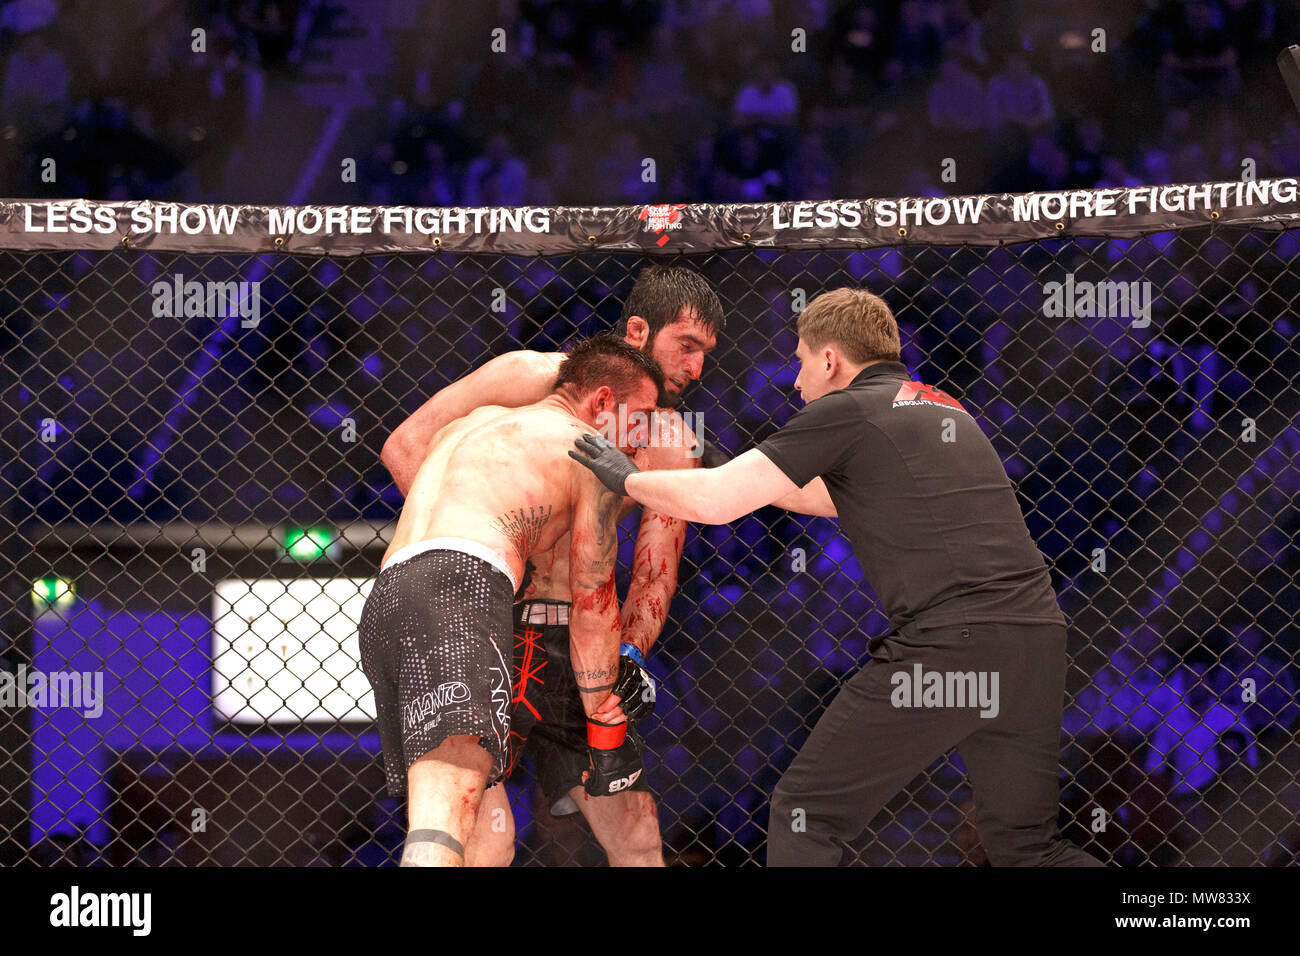 Abdul-Rakhman Dzhanaev versus Adam Zając at ACB 54 in Manchester, UK. Referee Viktor Korneev steps in to call for the doctor due to Zając's heavily blooded nose and lip. Dzhanaev was declared the winner due to a TKO by doctor's stoppage. Absolute Championship Berkut, Mixed Martial Arts, MMA fight. Stock Photo